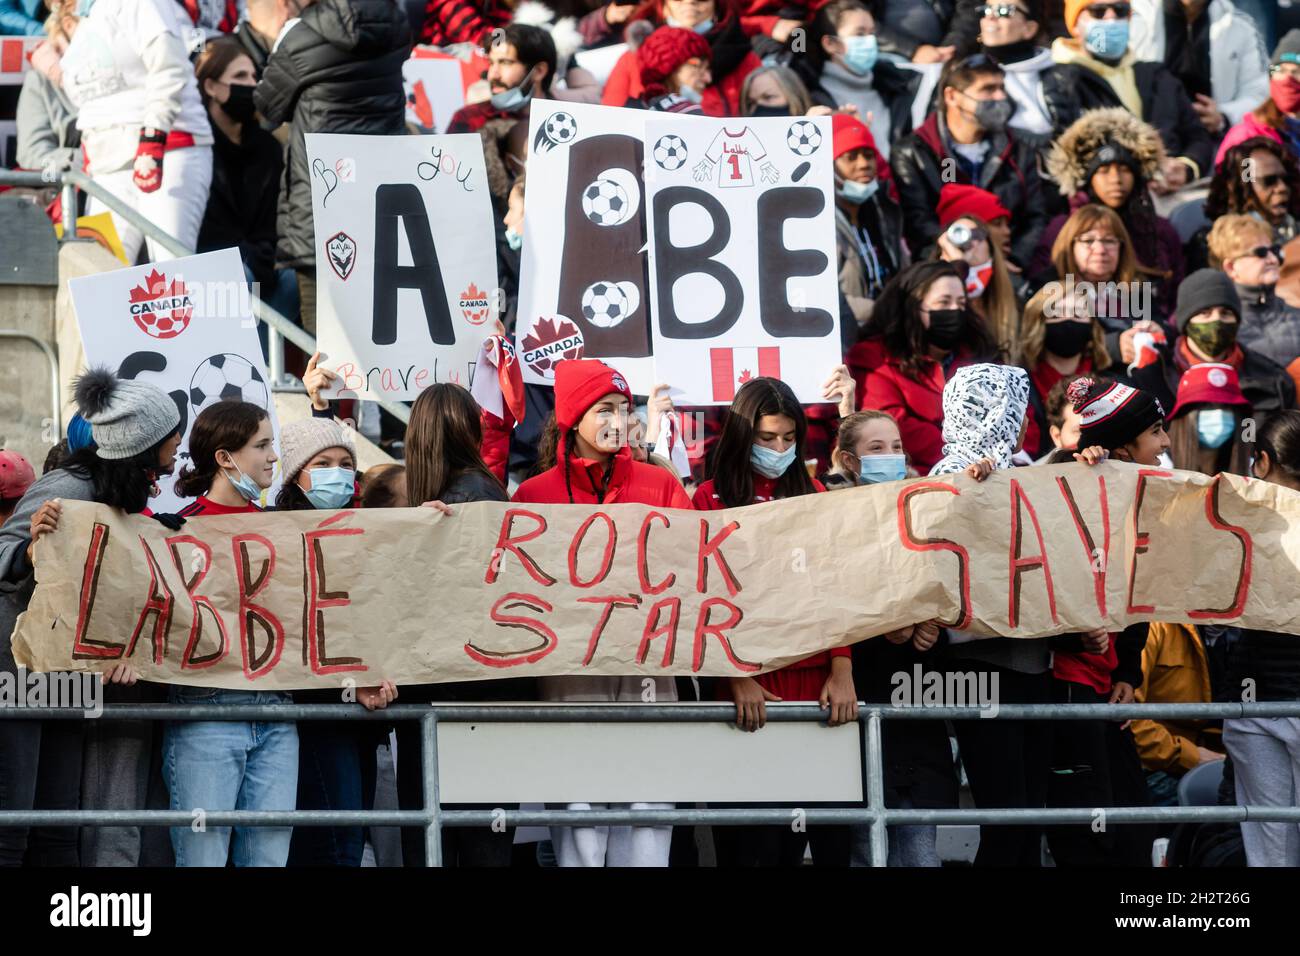 Ottawa, Canada, October 23, 2021: Team Canada fans with signs supporting their team during the Celebration Tour match between Canada and New Zealand at TD Place in Ottawa, Canada. Canada won the match 5-1. Stock Photo